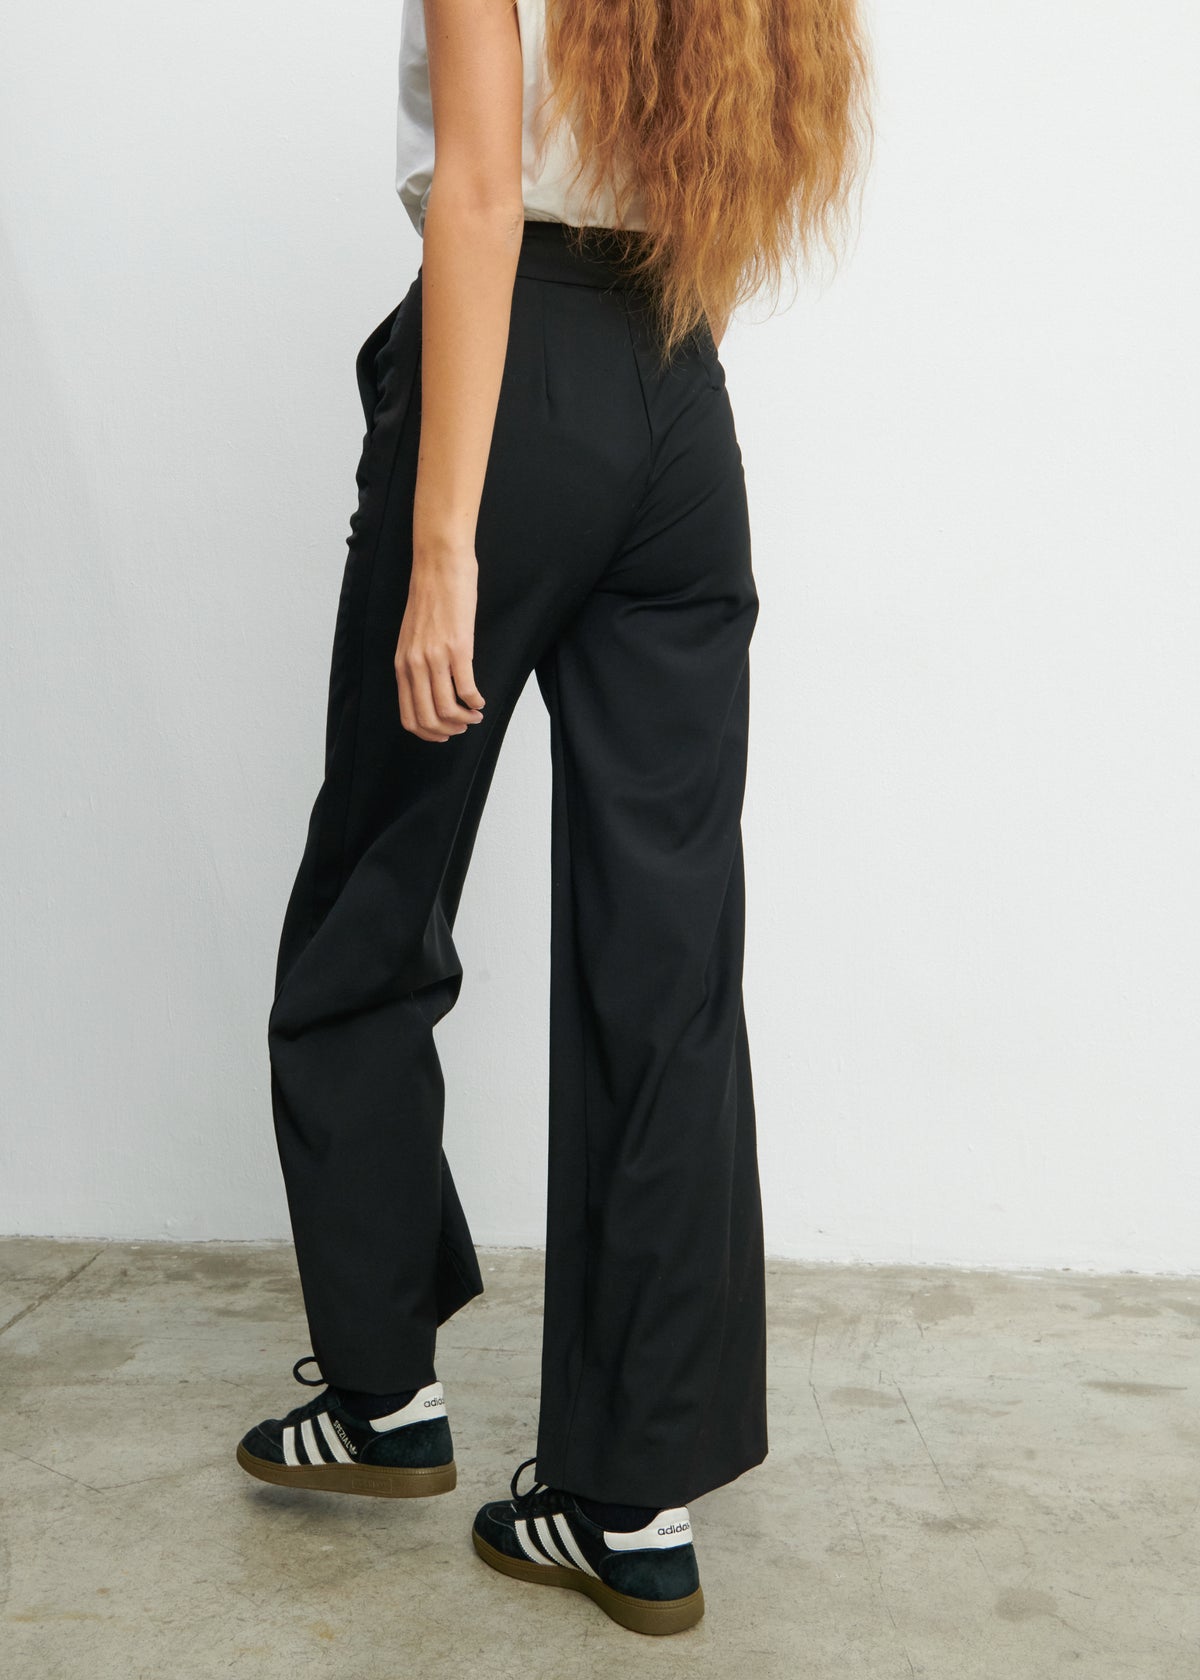 BLACK PALAZZO PANTS WITH SATIN CONTRAST